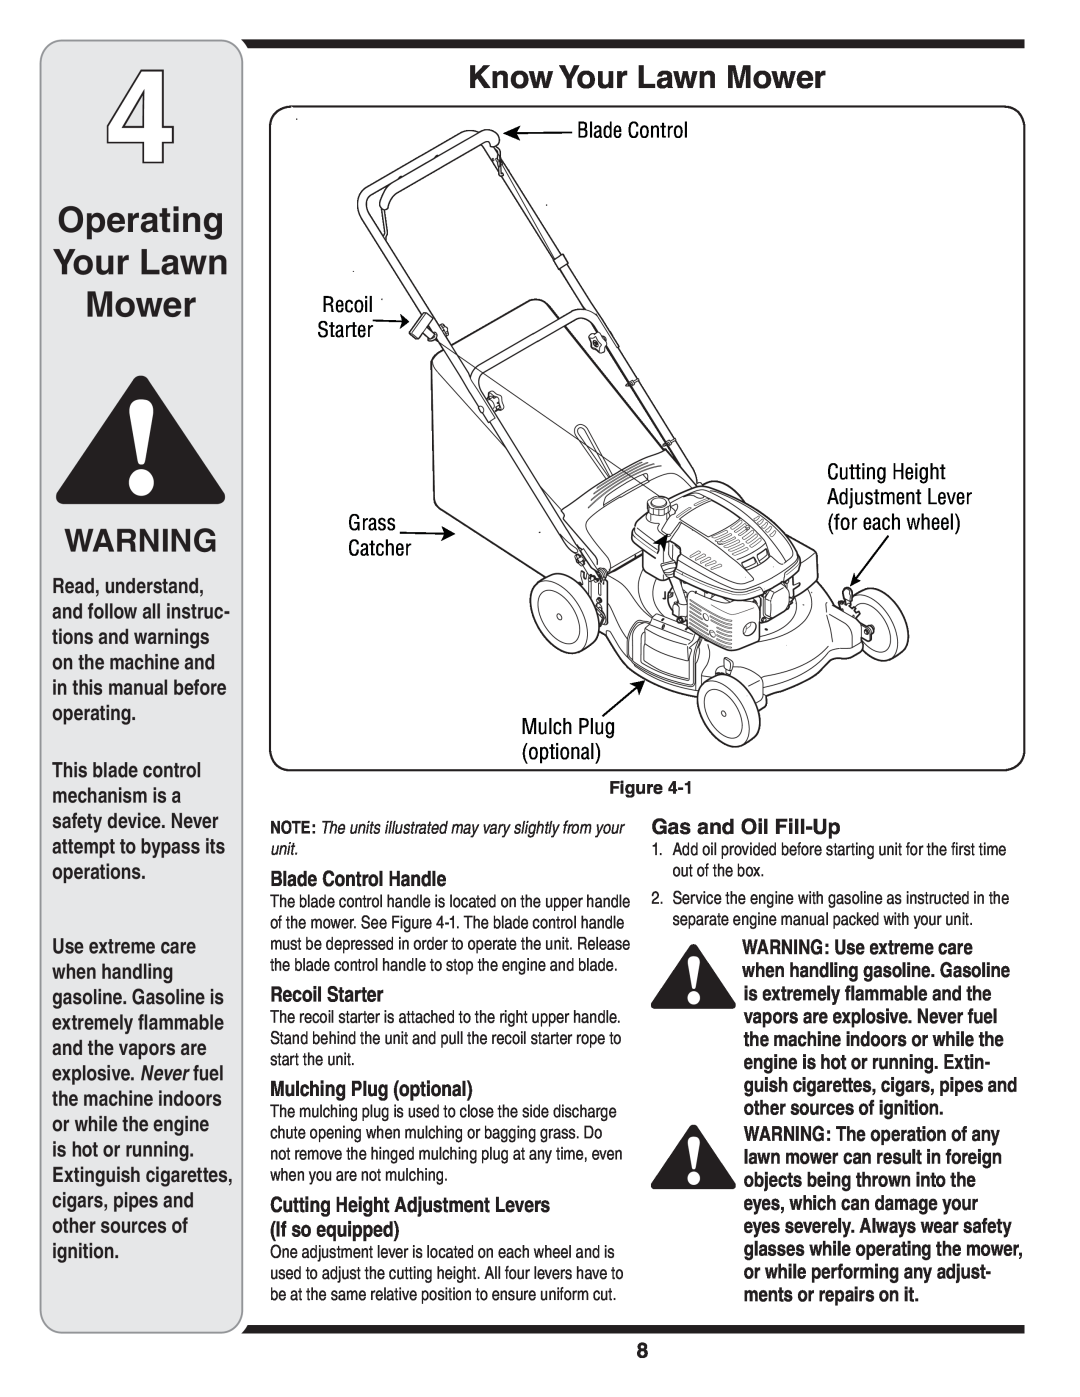 MTD 60-1620-4 Operating Your Lawn Mower, Know Your Lawn Mower, Adjustment Lever, This blade control mechanism is a 